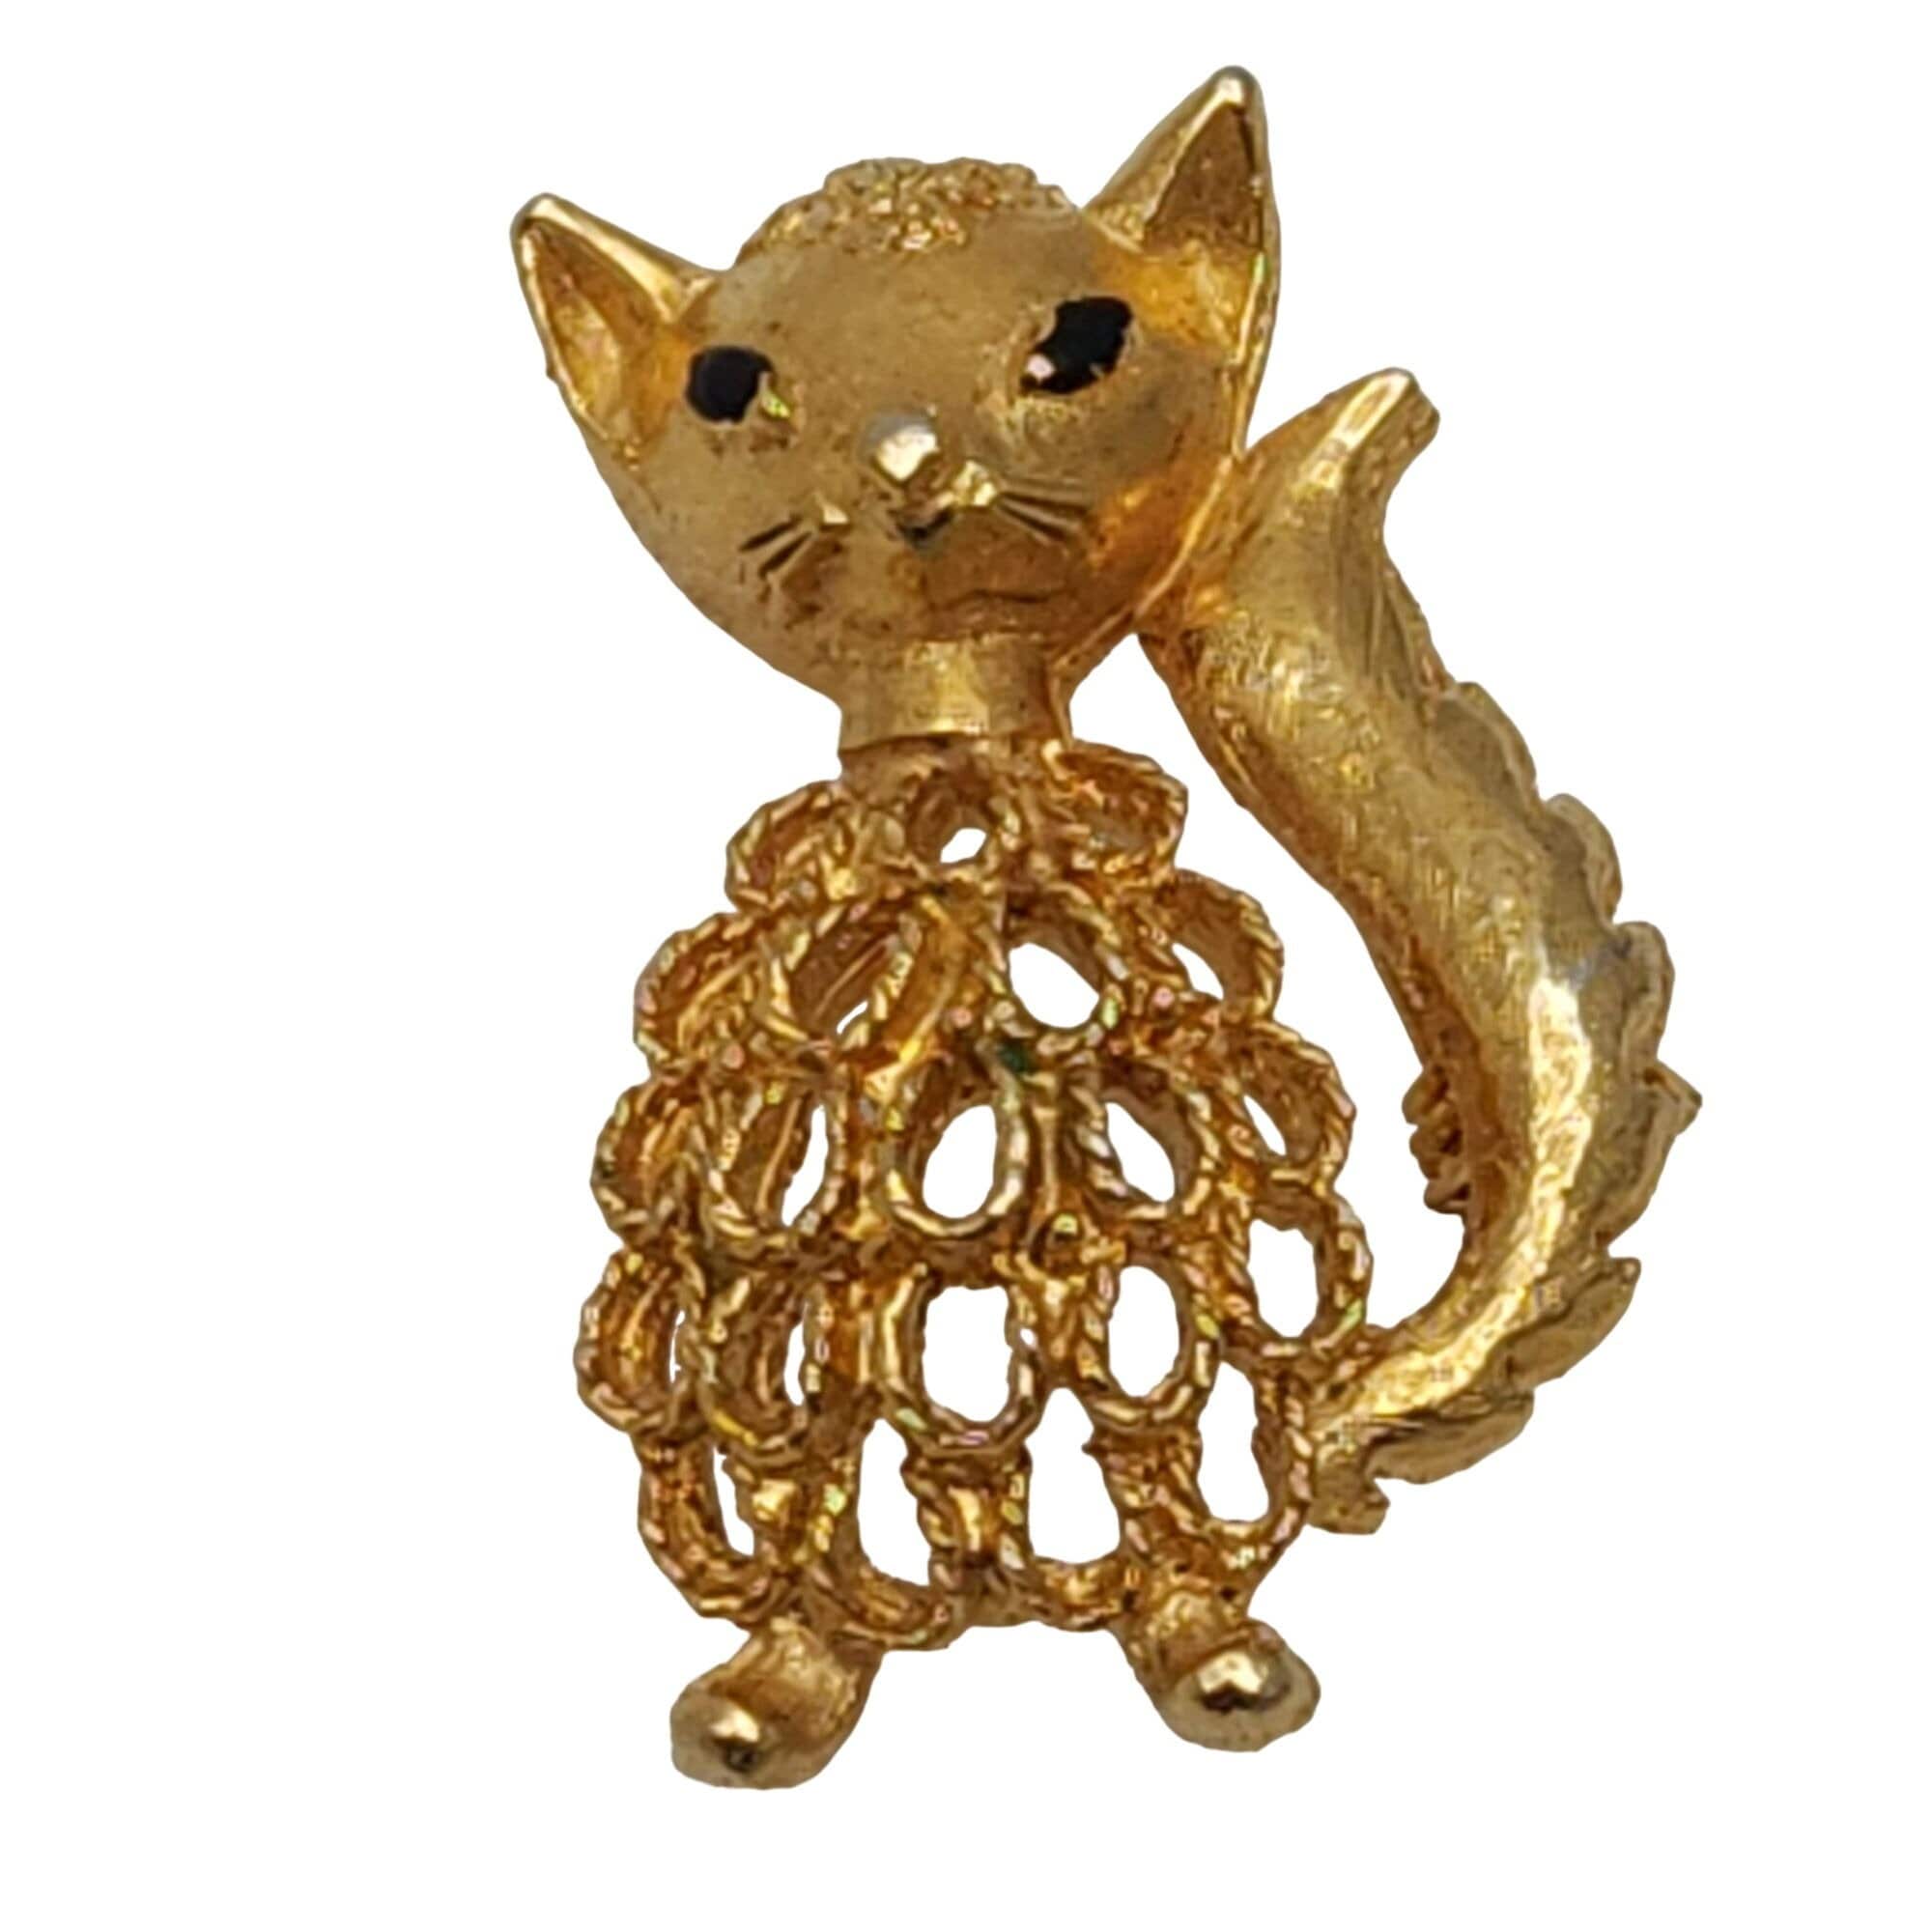 AJIWYH Brooch Pins for Women Fashion Alloy Cute Little Animal Cat Brooch Lapel Pin Ladies Clothing Pins Accessories Jewelry, Women's, Size: One size, Silver